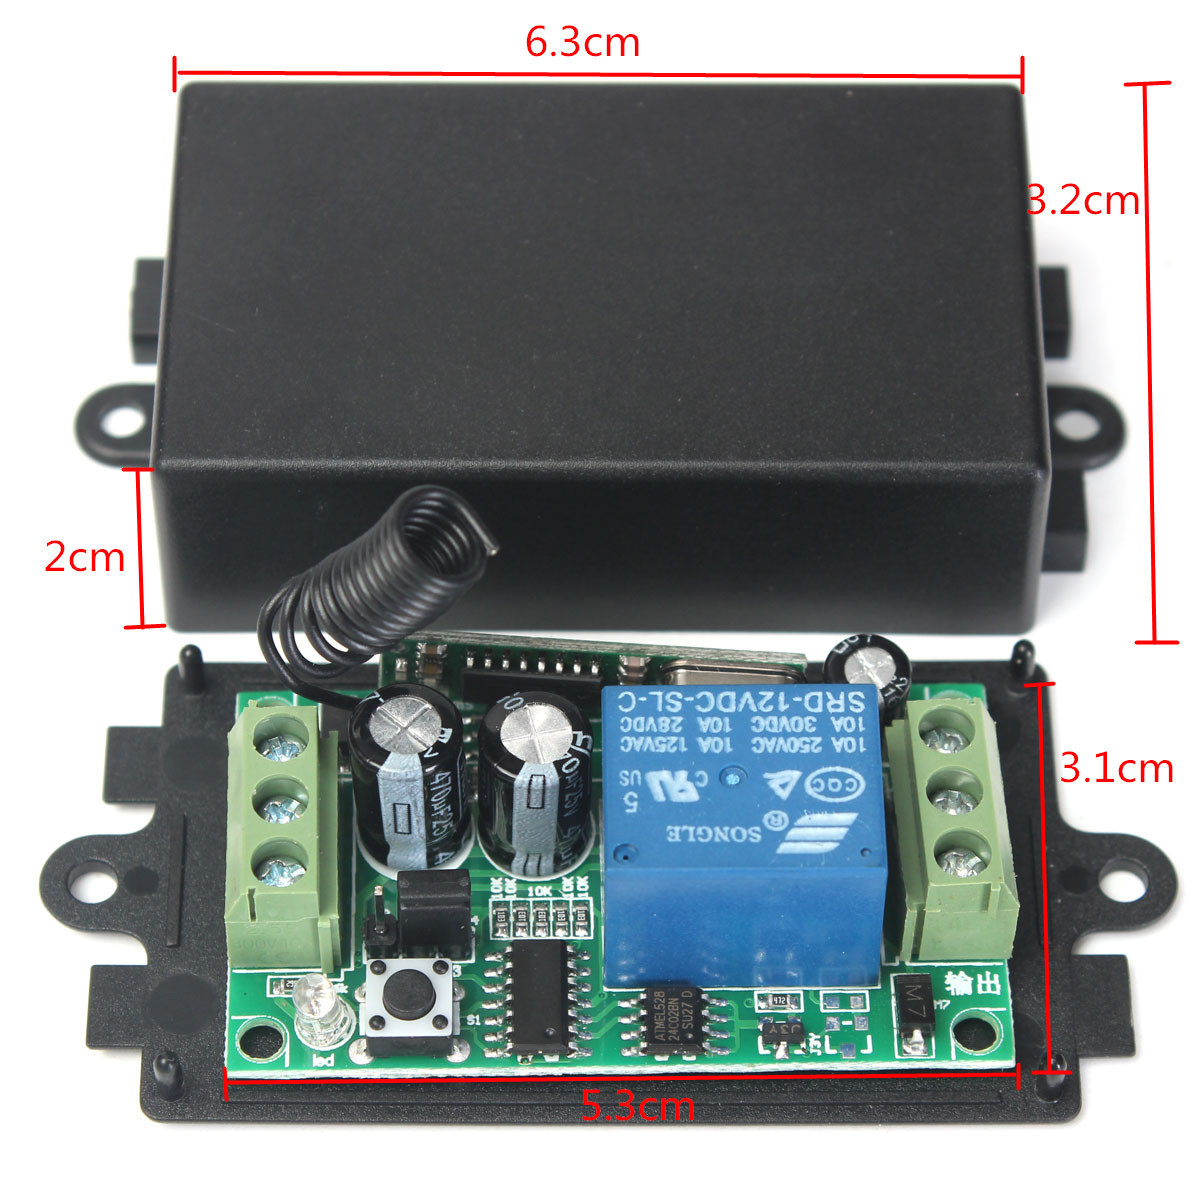 Geekcreitreg-433MHz-DC-12V-10A-Relay-1CH-Channel-Wireless-RF-Remote-Control-Switch-Transmitter-With--1040721-1